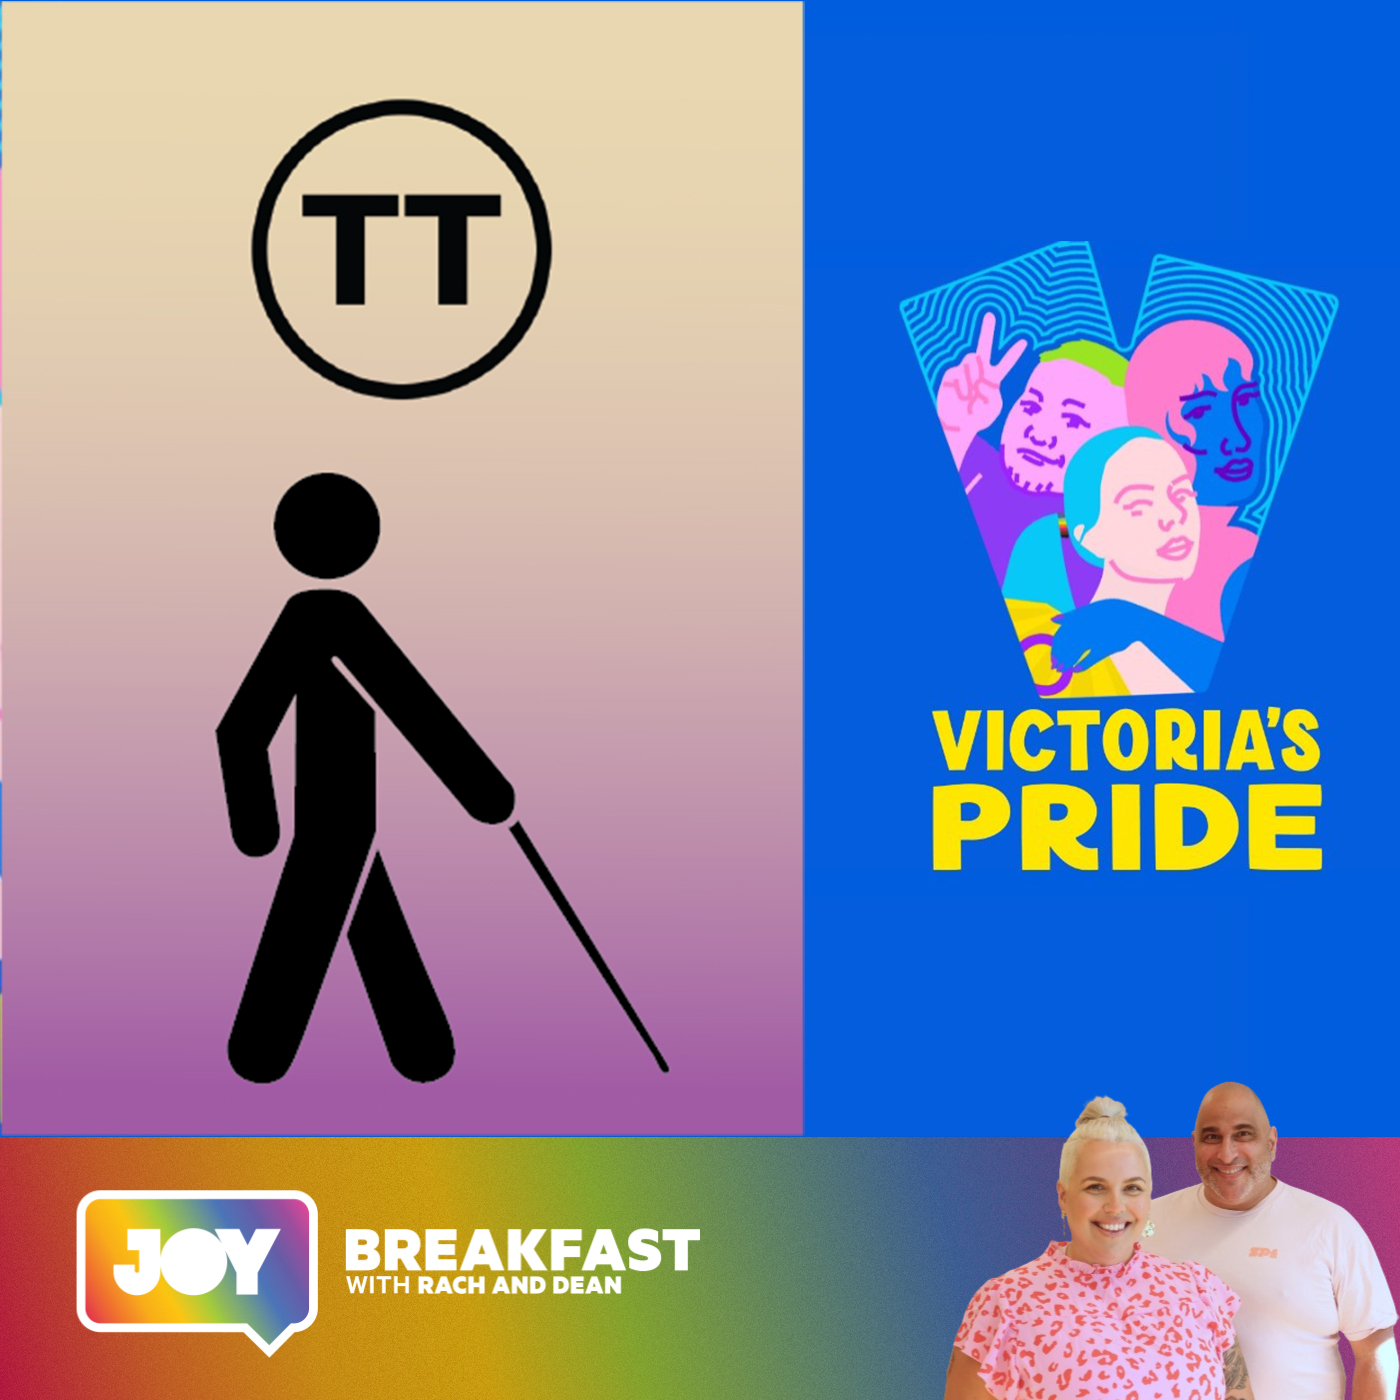 Travelling Touch Tour at Victoria’s Pride